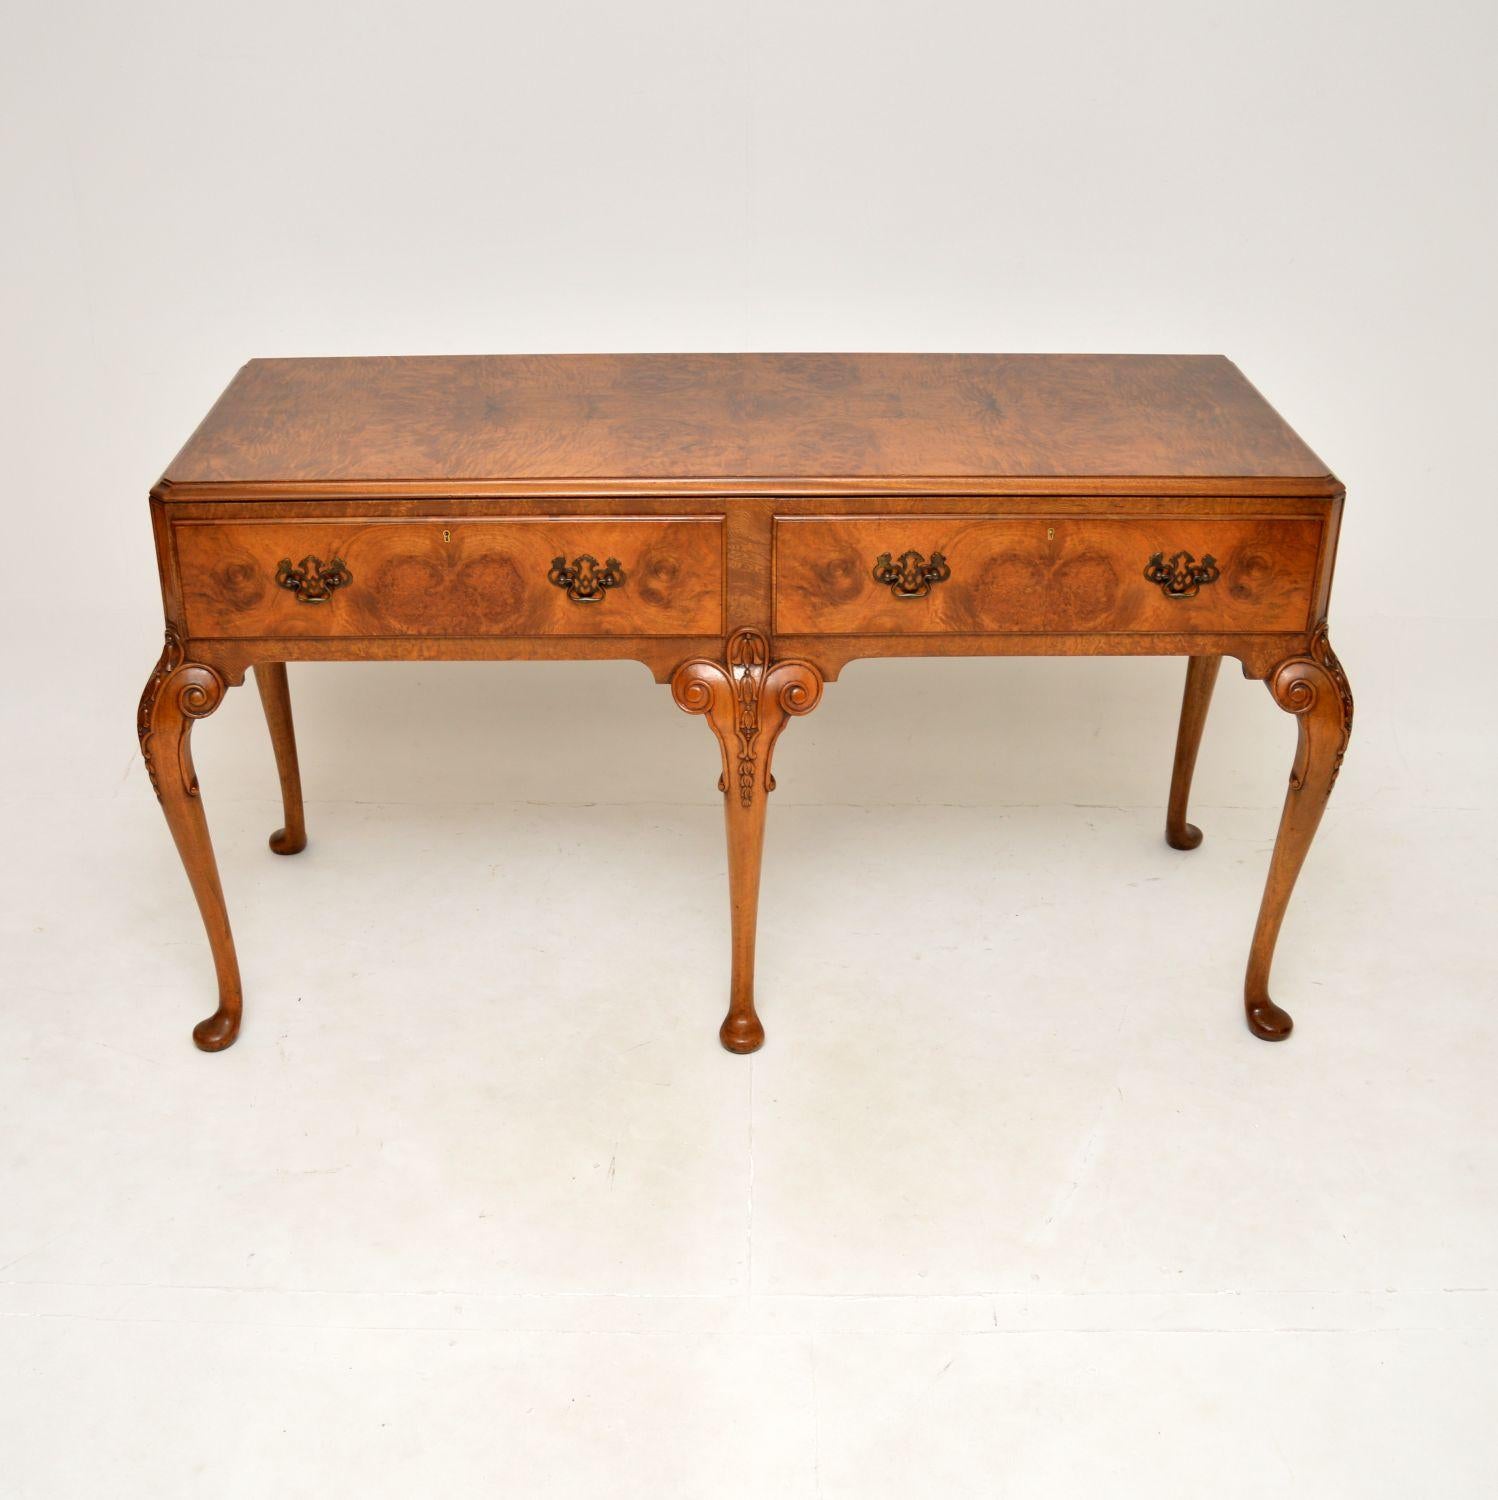 A stunning and large antique burr walnut console table. This is in the Queen Anne style, it was made in England and dates from around the 1900-1910 period.

It is of superb quality, with beautiful crisp carving on the legs and gorgeous burr walnut